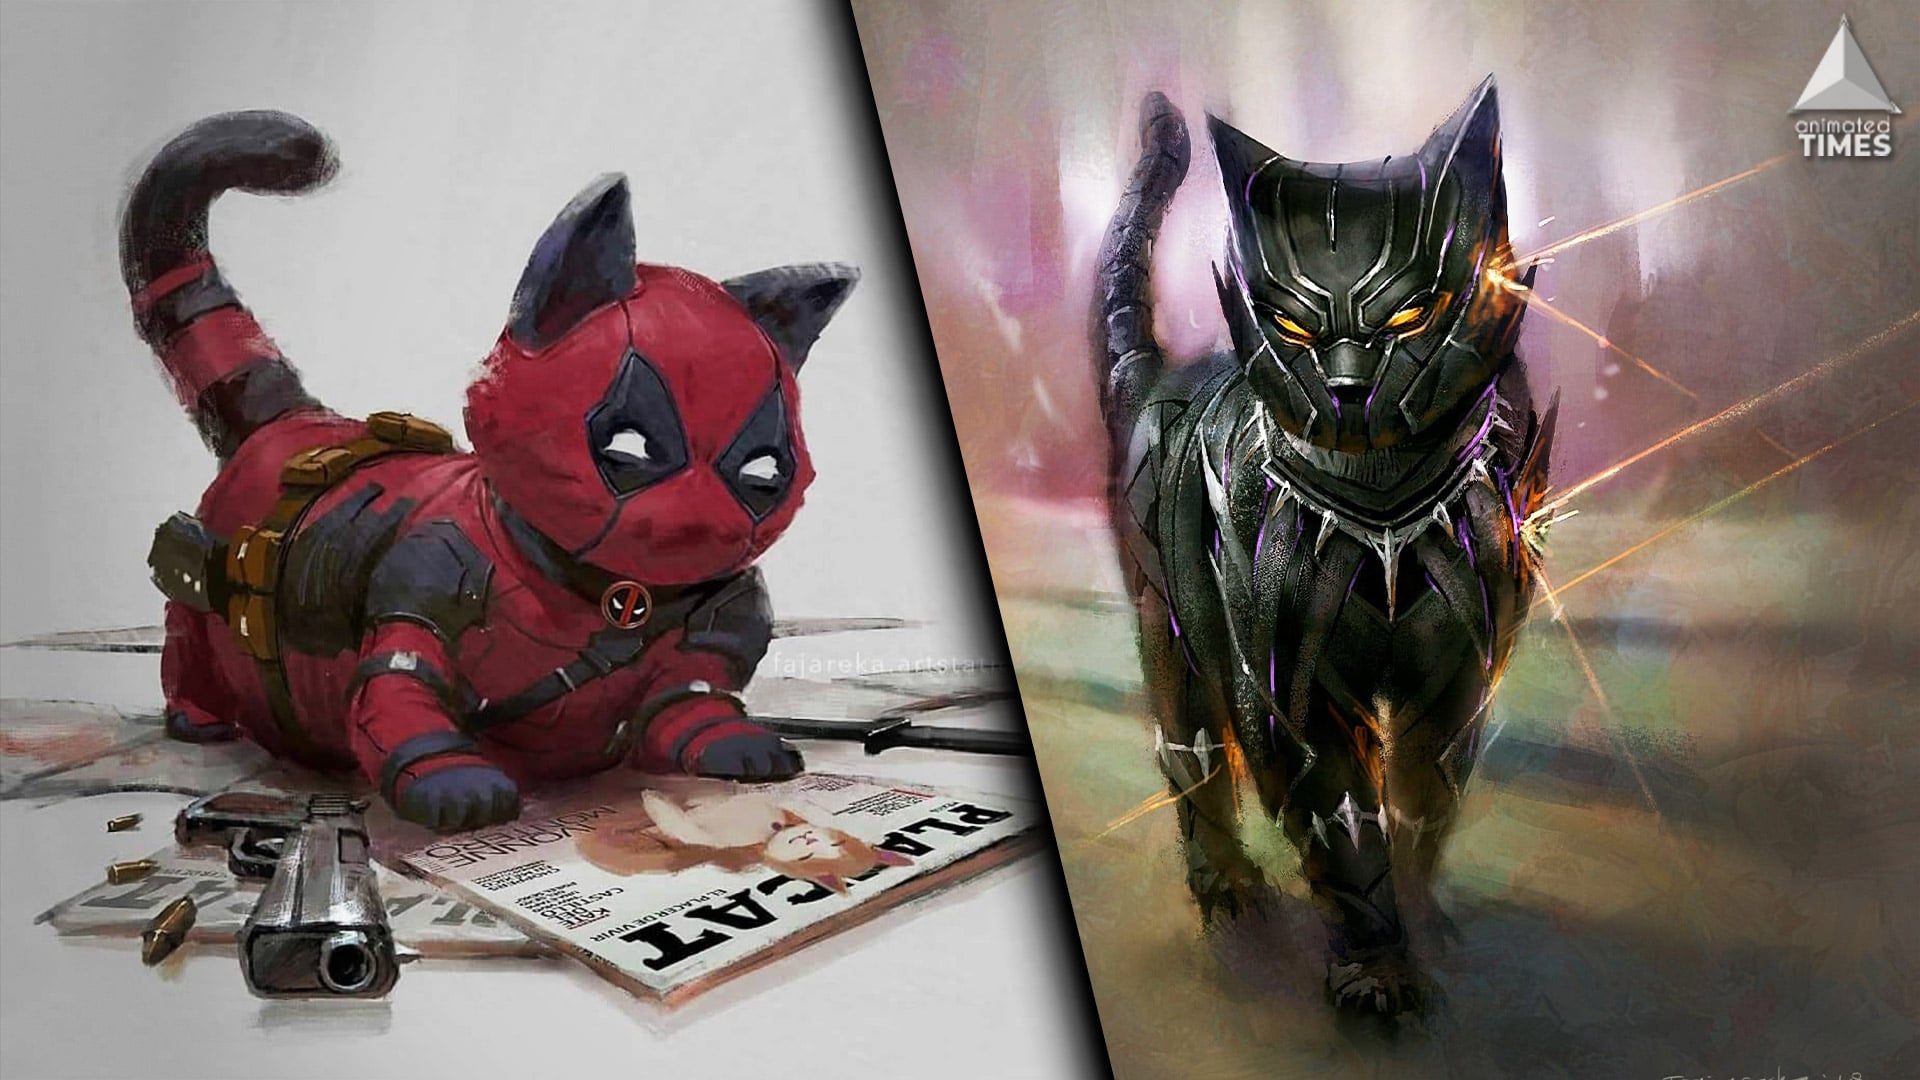 Cats Re-imagined As Popular Marvel Superheroes - Animated Times